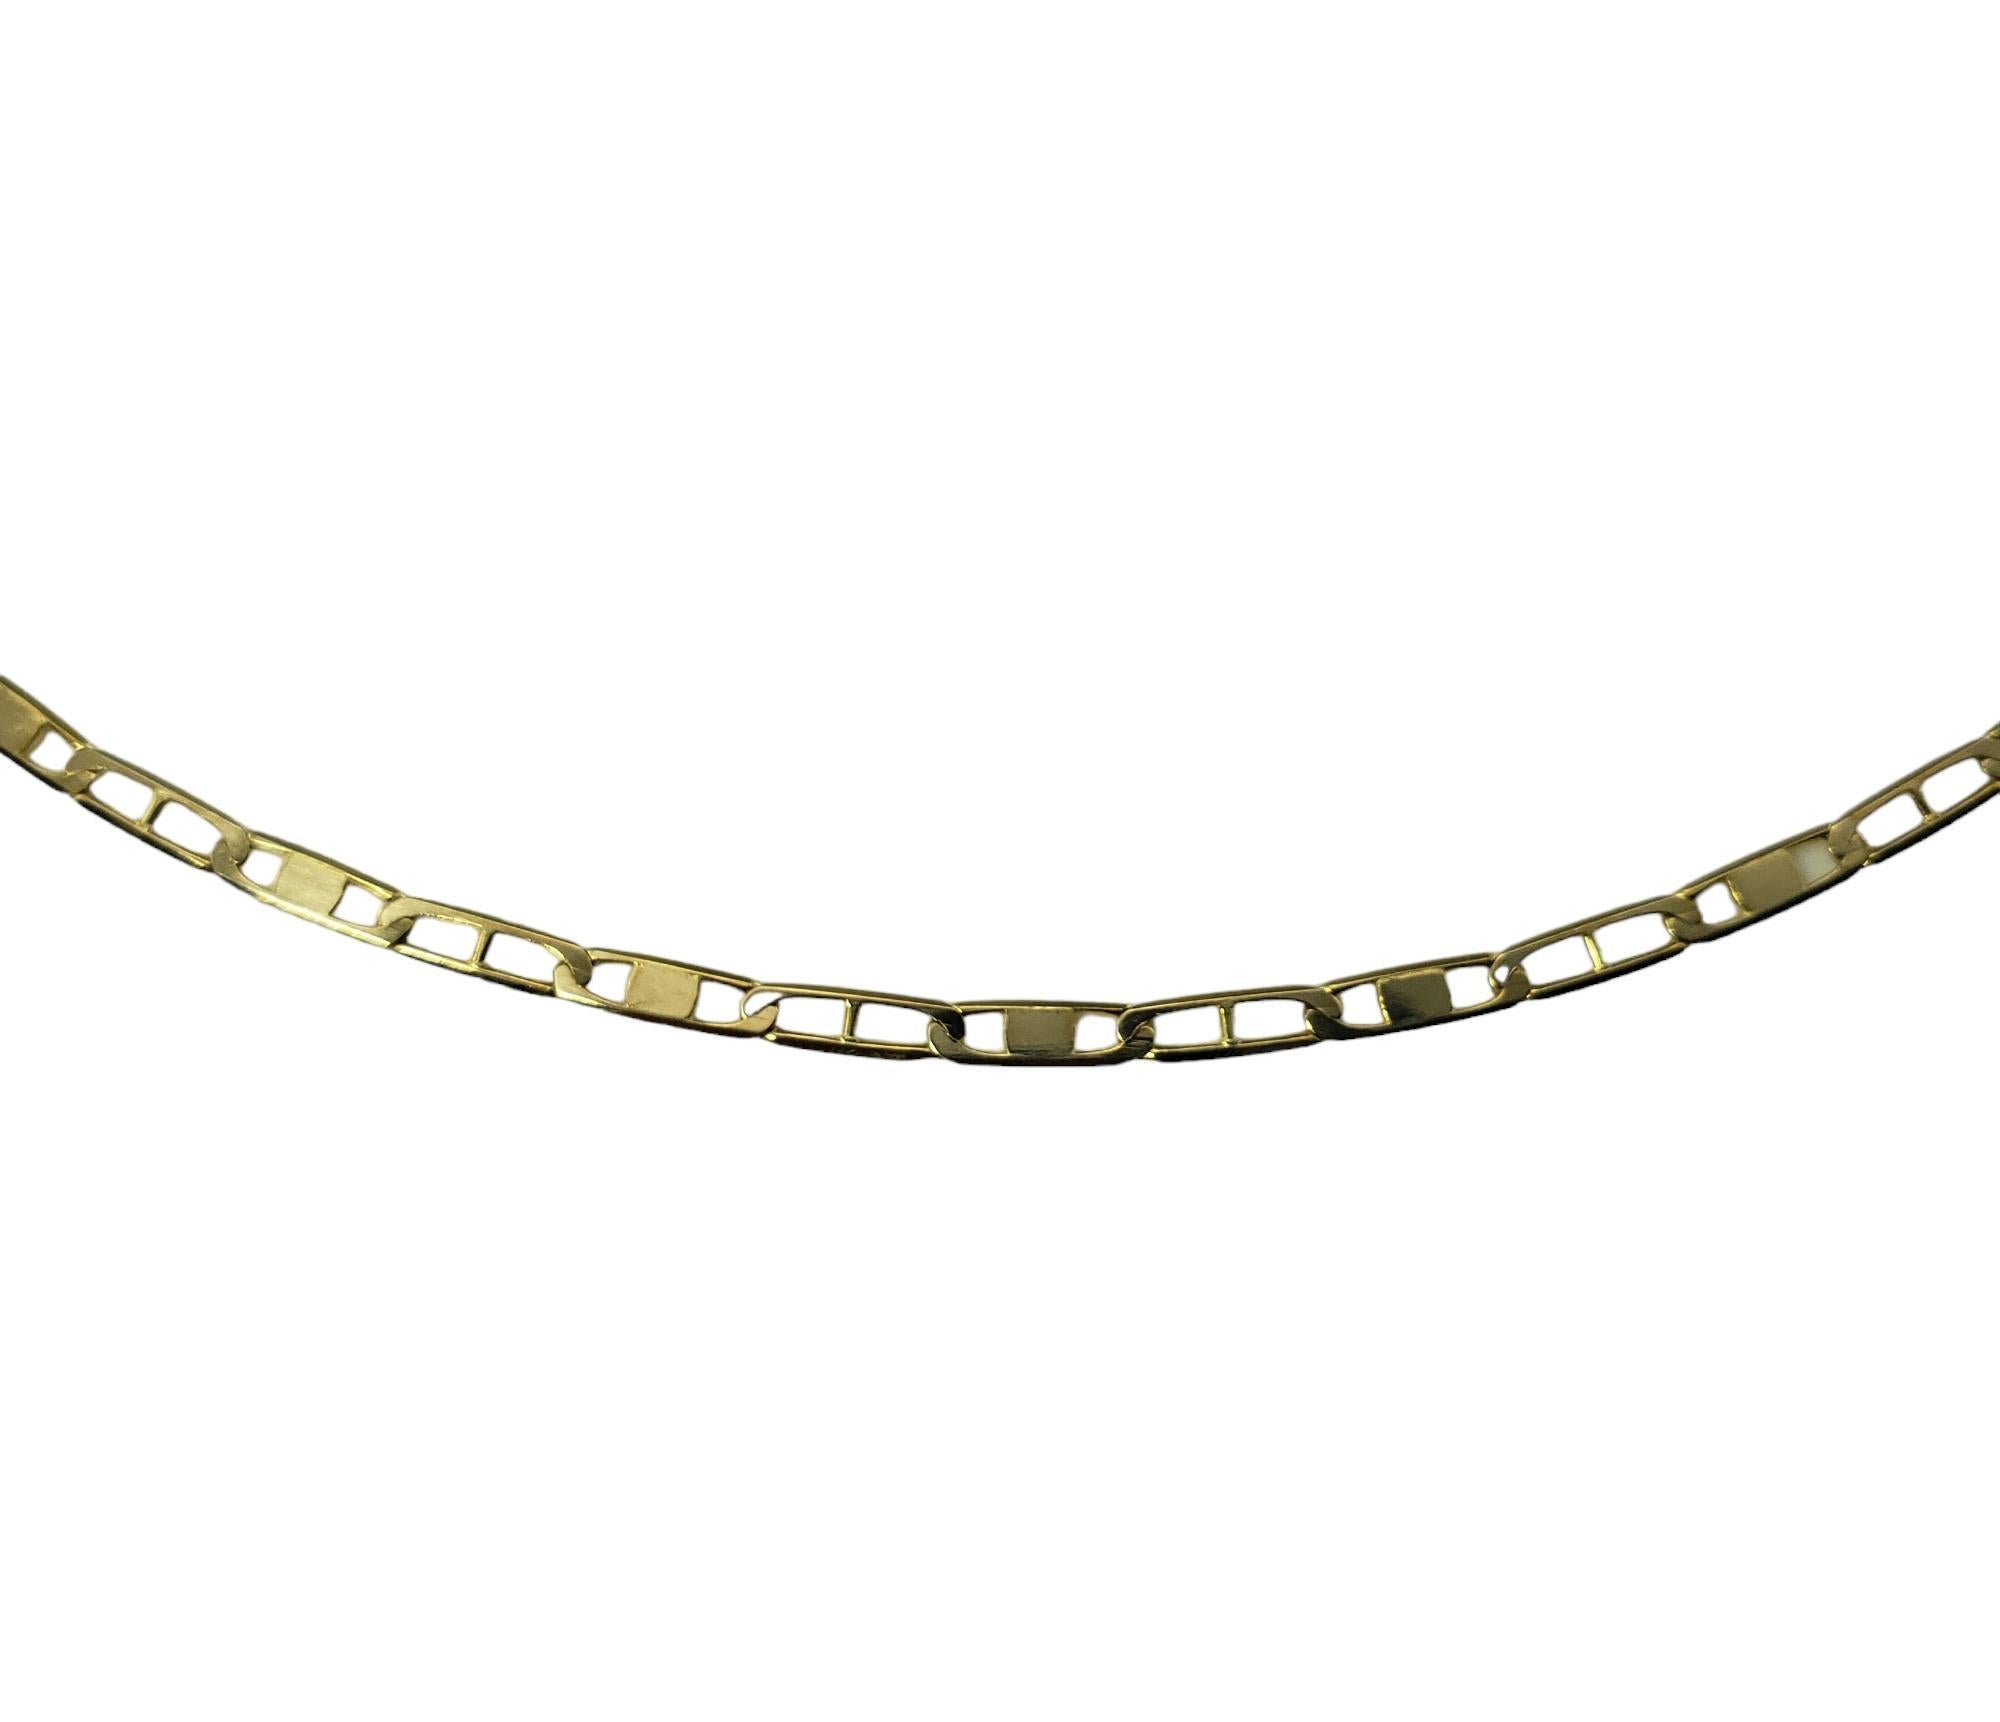 Vintage 14 Karat Yellow Gold Link Necklace-

This elegant link necklace is crafted in beautifully detailed 14K yellow gold.  Width:  4 mm.

Size:  20 inches

Weight: 6.7 gr./ 4.3 dwt.

Stamped: Italy  14KT

Very good condition, professionally